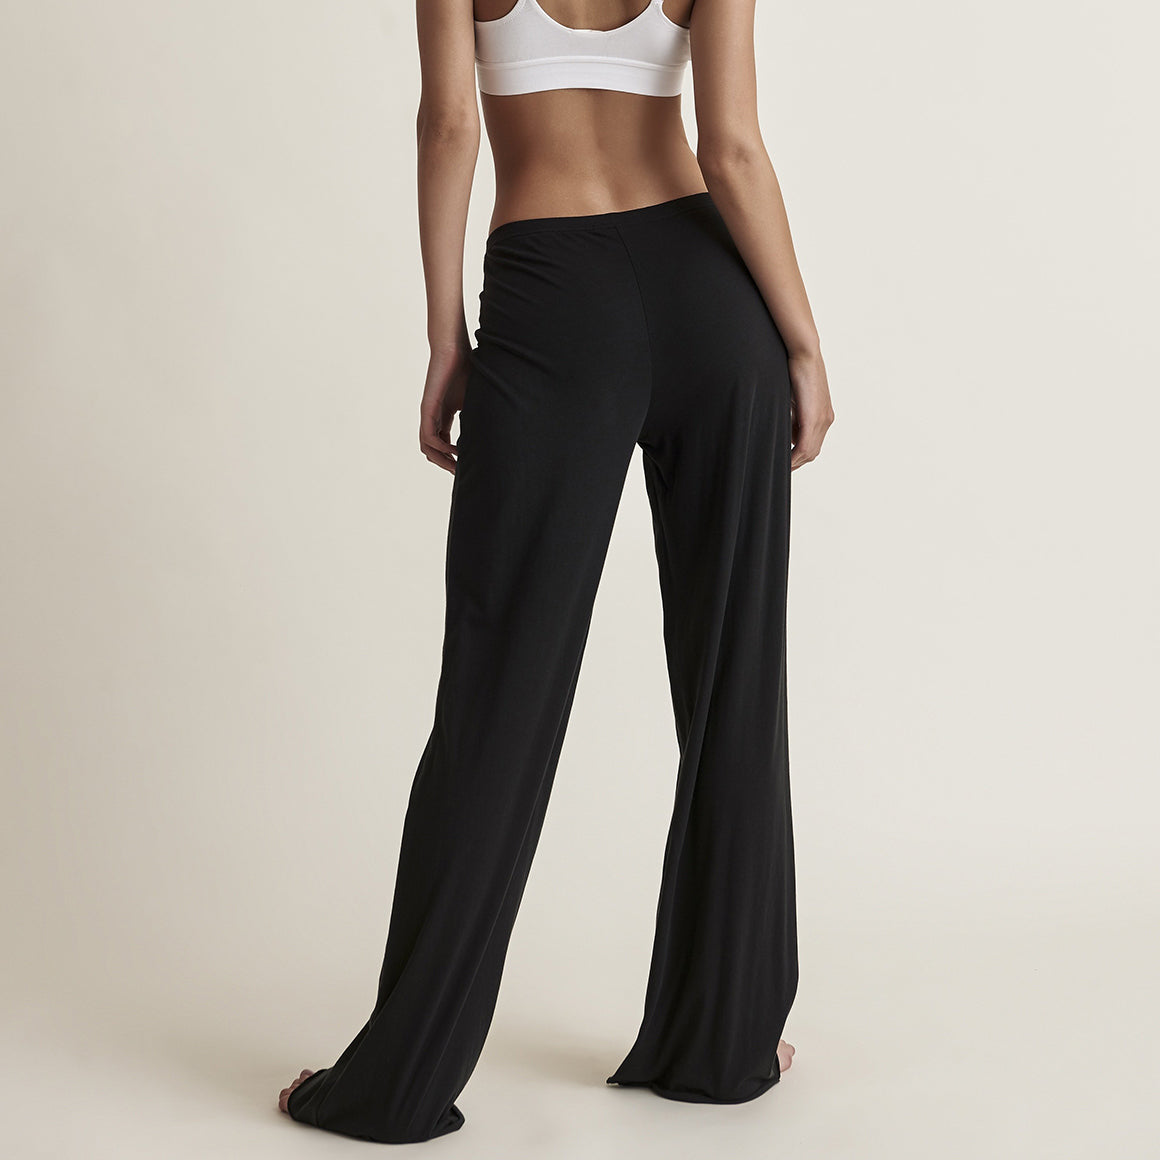 With its relaxed yet flattering fit, these pants are suitable for various occasions, whether you're running errands or simply relaxing on a lazy Sunday. The airy wide leg and elastic waistband provides a stylish and comfortable fit for all body types.